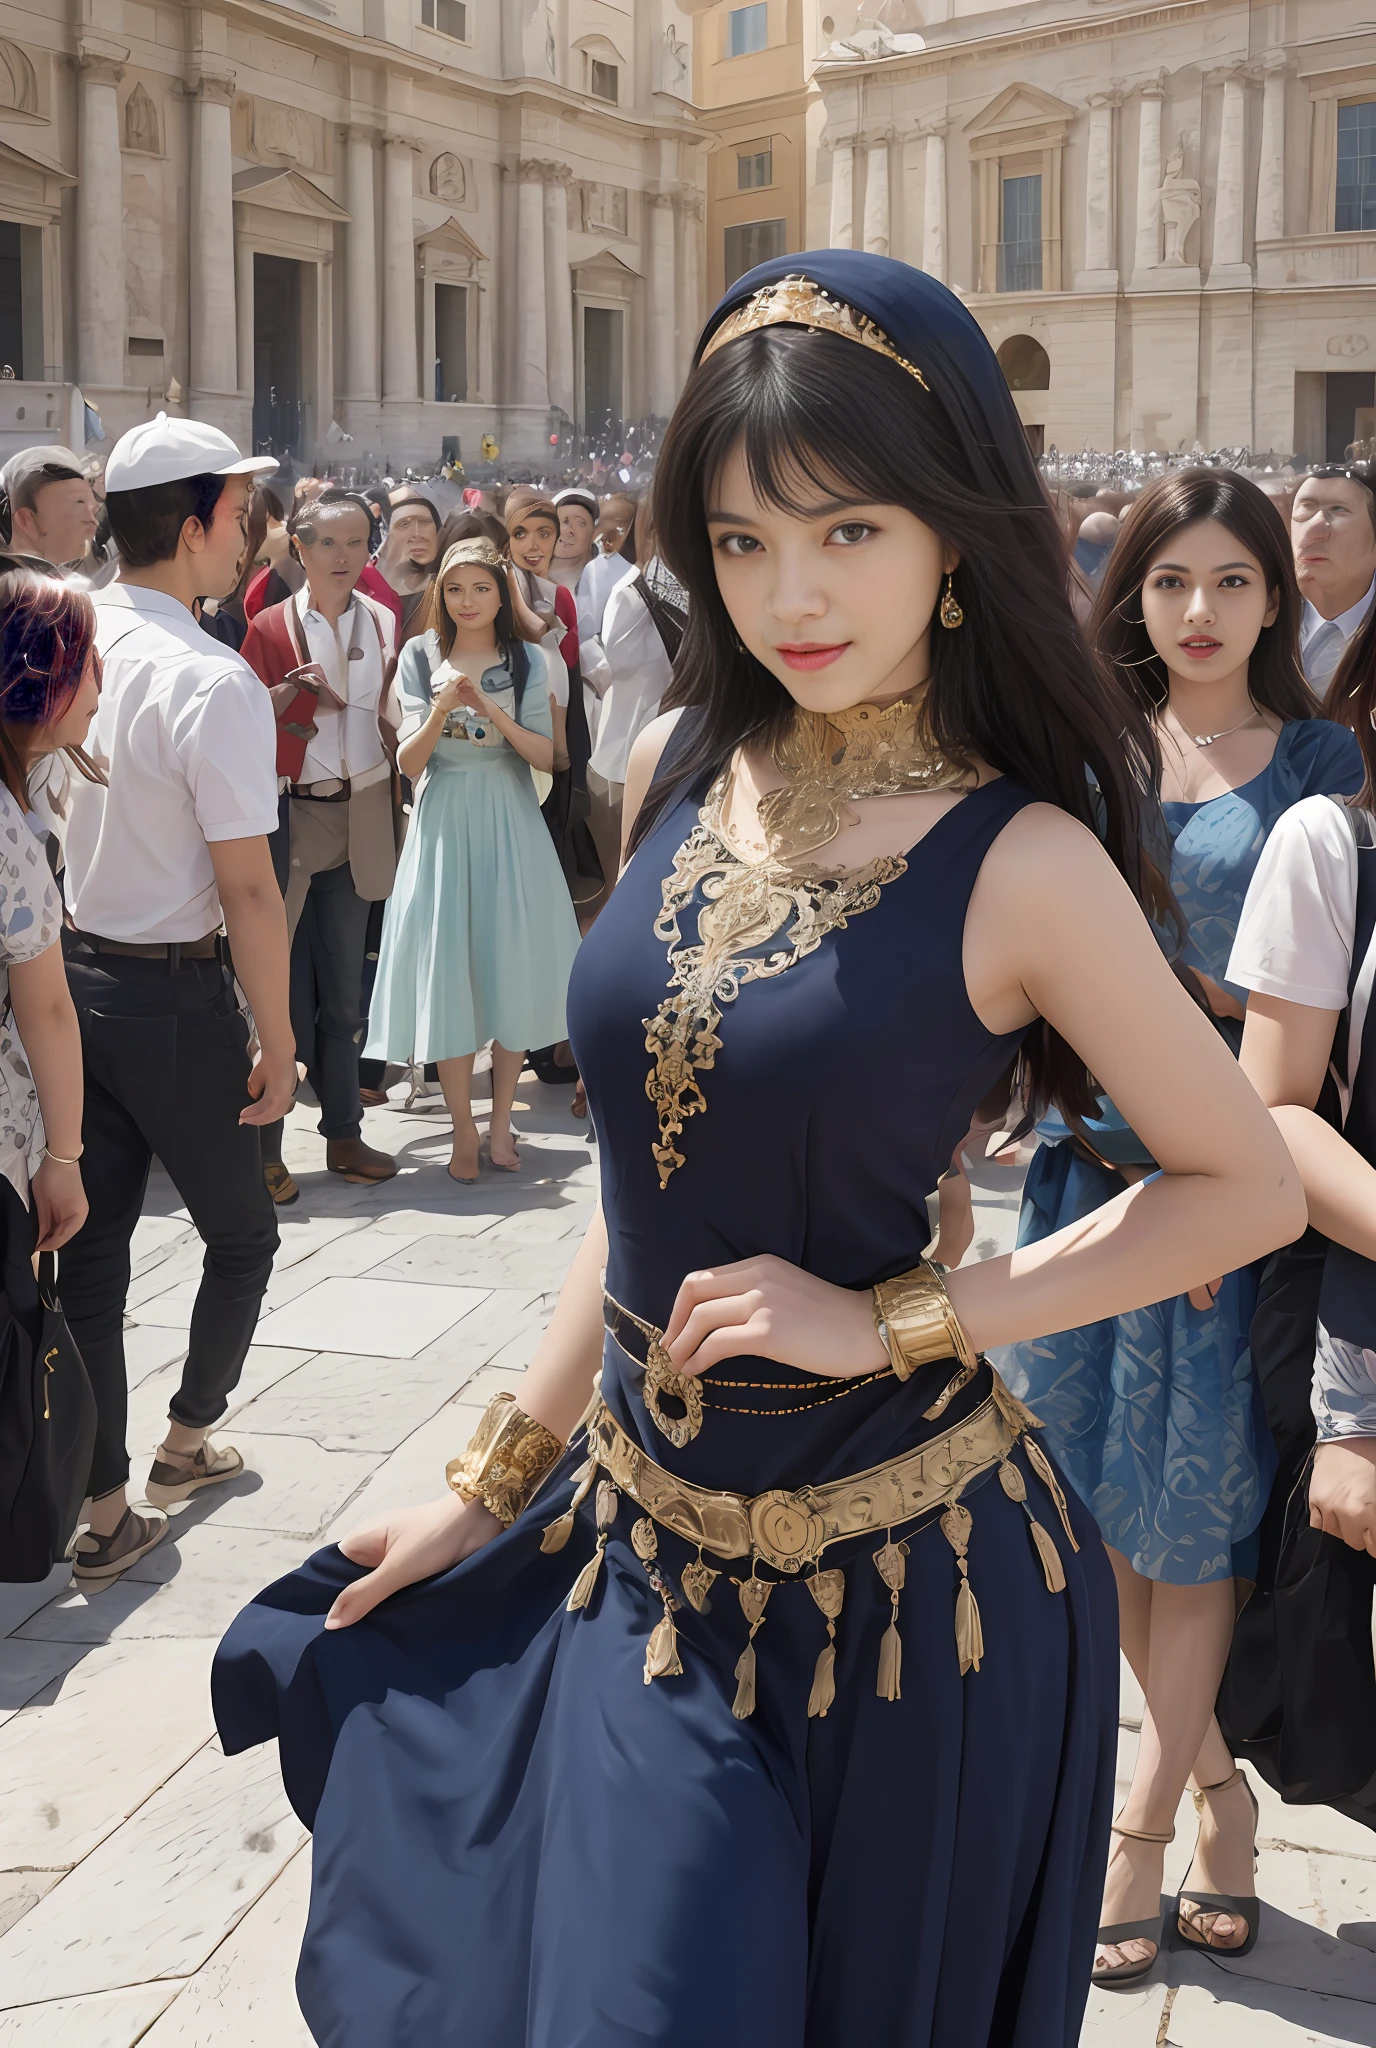 (Masterpiece, Best quality, Realistic),
1girl big breasts,(on the St. Peter's Square of Vatican,crowd), Saint. Peter's Square of Vatican background, gypsy dress, Dancing, Intricate, Dark blue dress, Gold,banquet, crowd, picking up skirt,Pale skin,
[Slight smile],